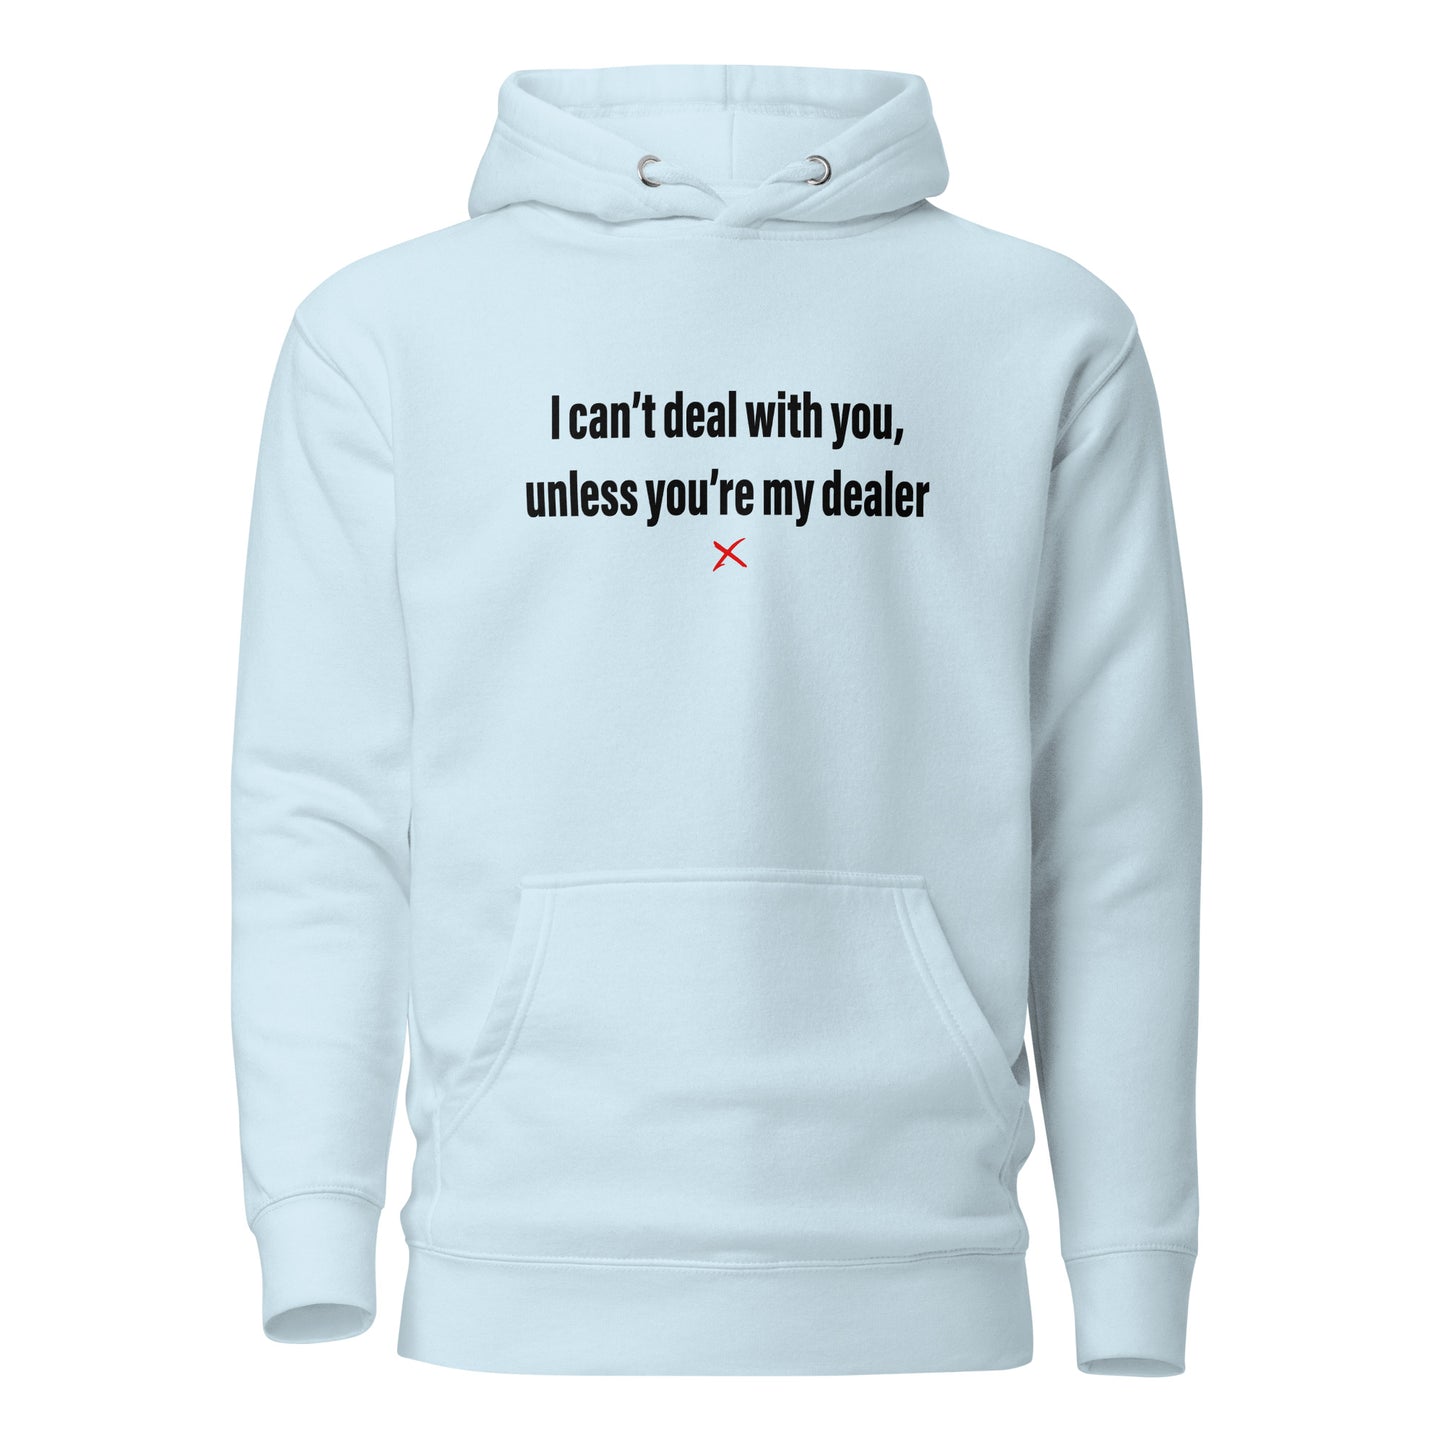 I can't deal with you, unless you're my dealer - Hoodie